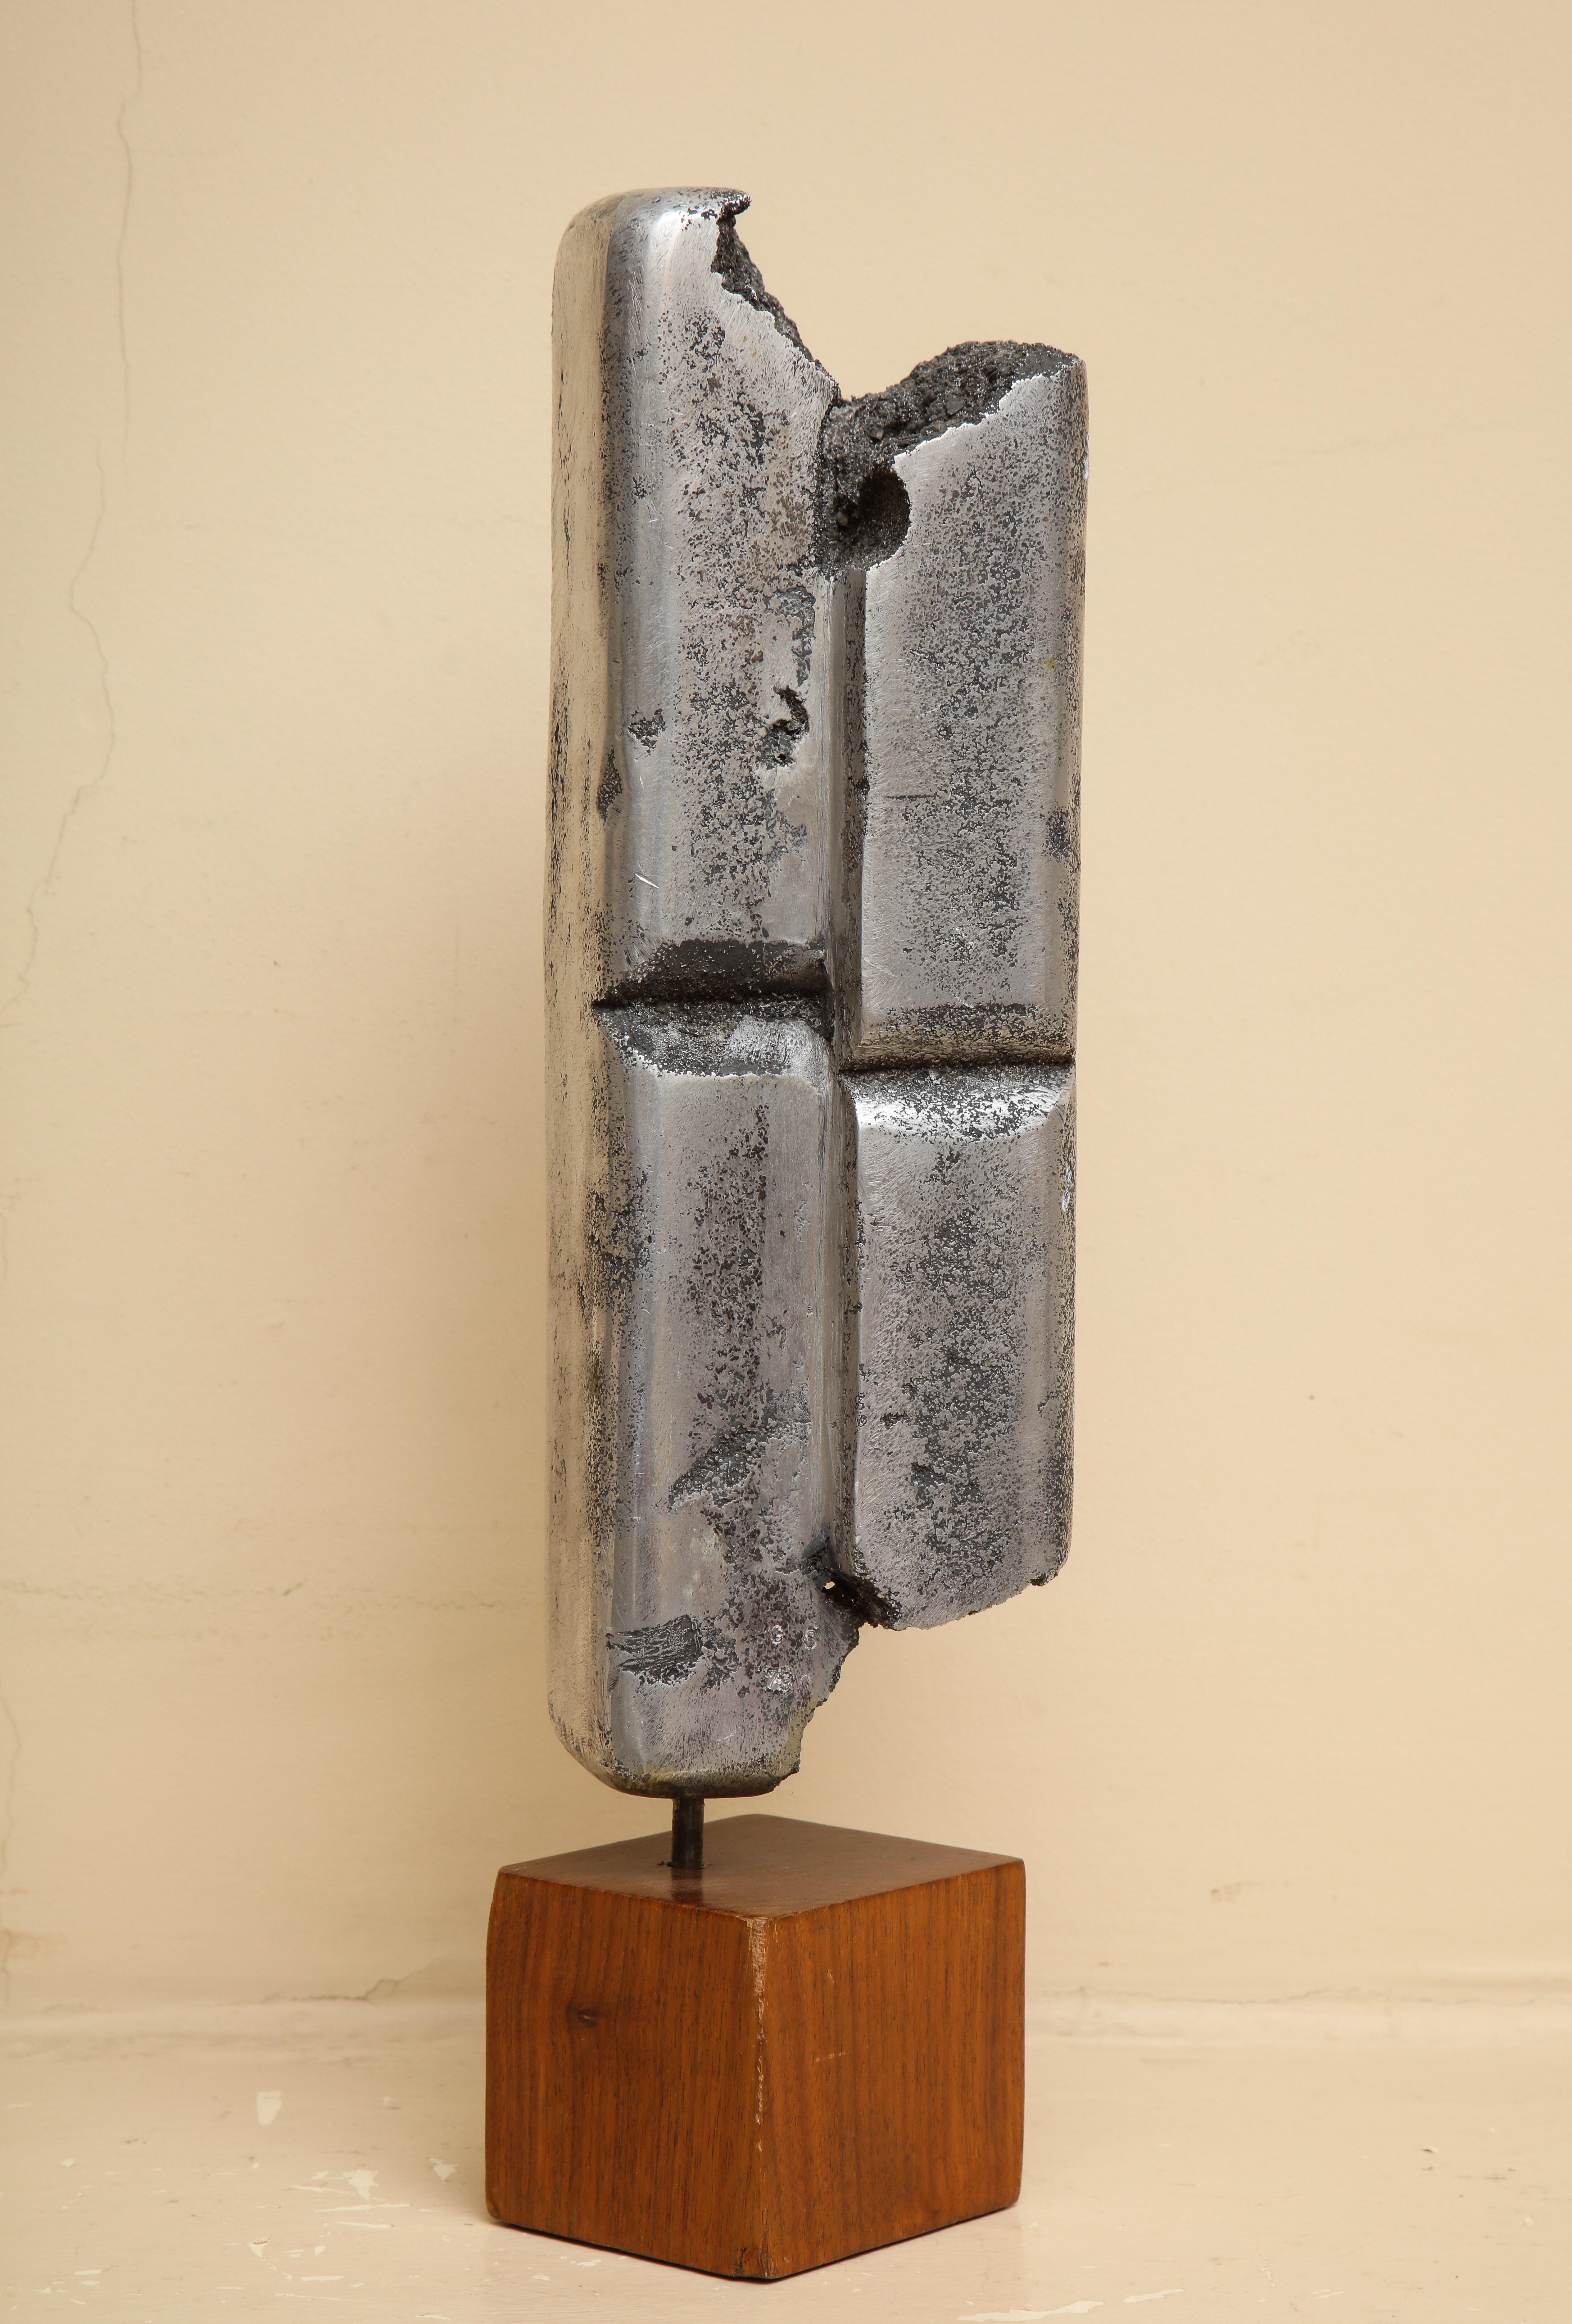 Sculpture 1 of 1. 
Cast Aluminum on wood

Siciliano celebrates in the act of creation with workmanship that is evident in every aspect of his sculpture and three-dimensional design inventions.  In this sculpture from the early 70's, depicts an